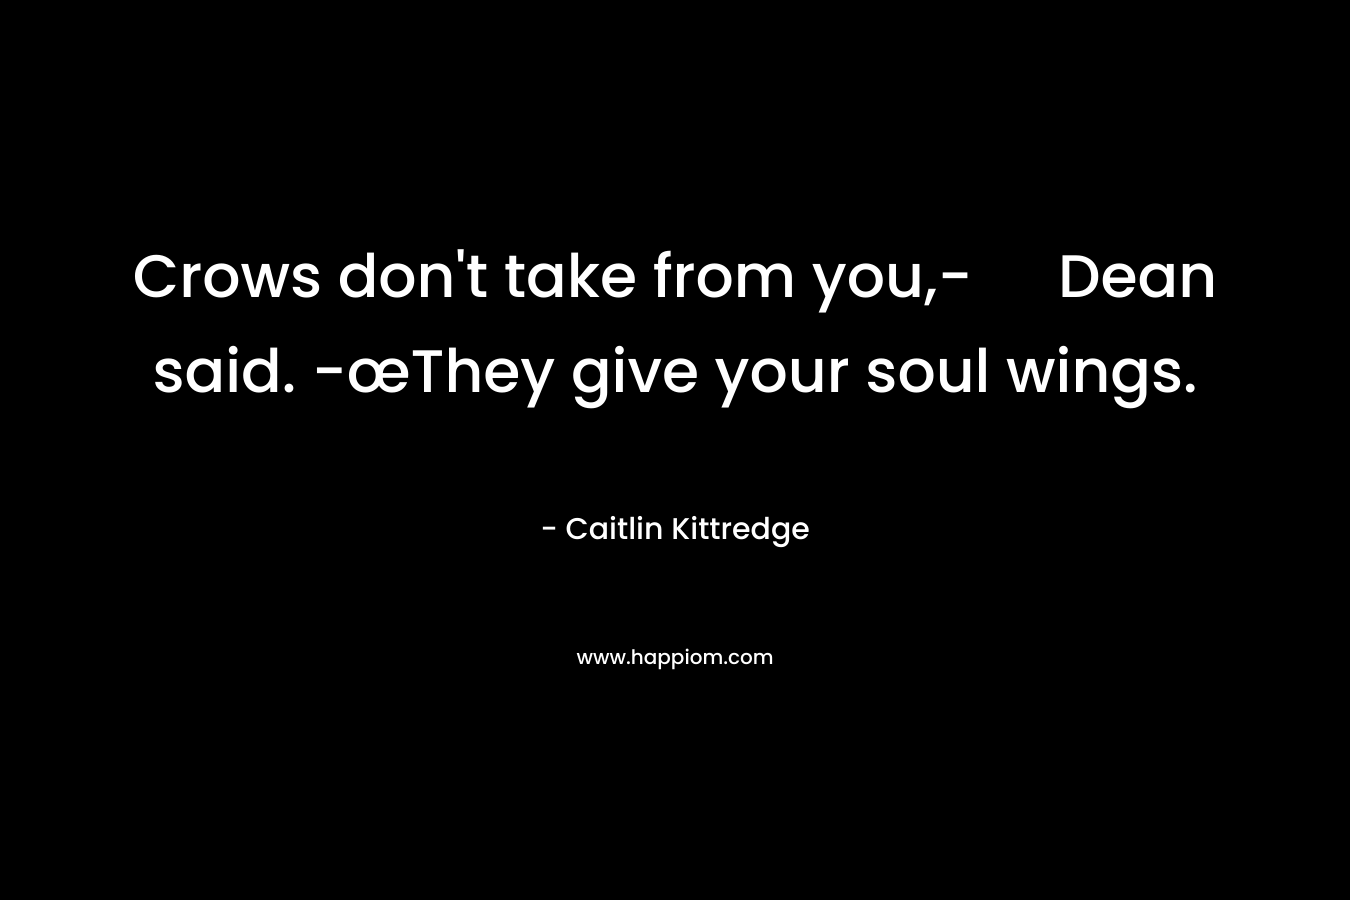 Crows don't take from you,- Dean said. -œThey give your soul wings.